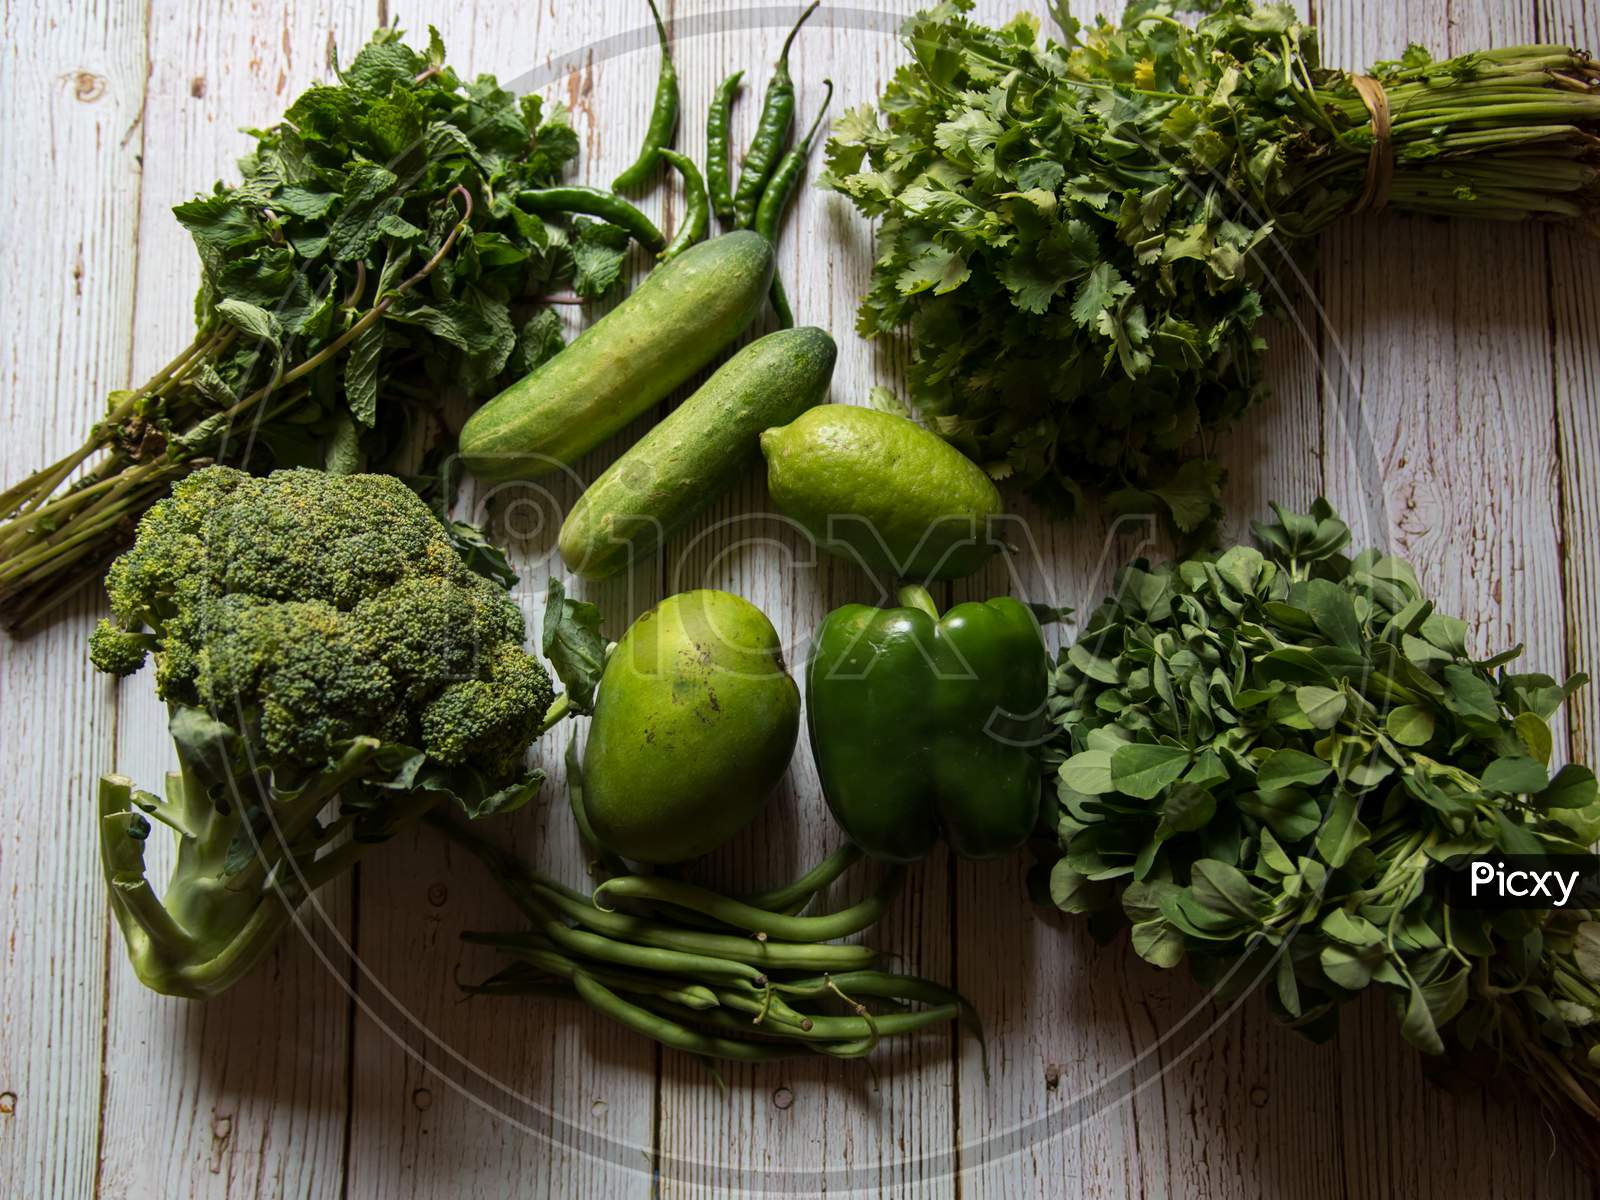 View from above of fresh vegetables on wooden background.